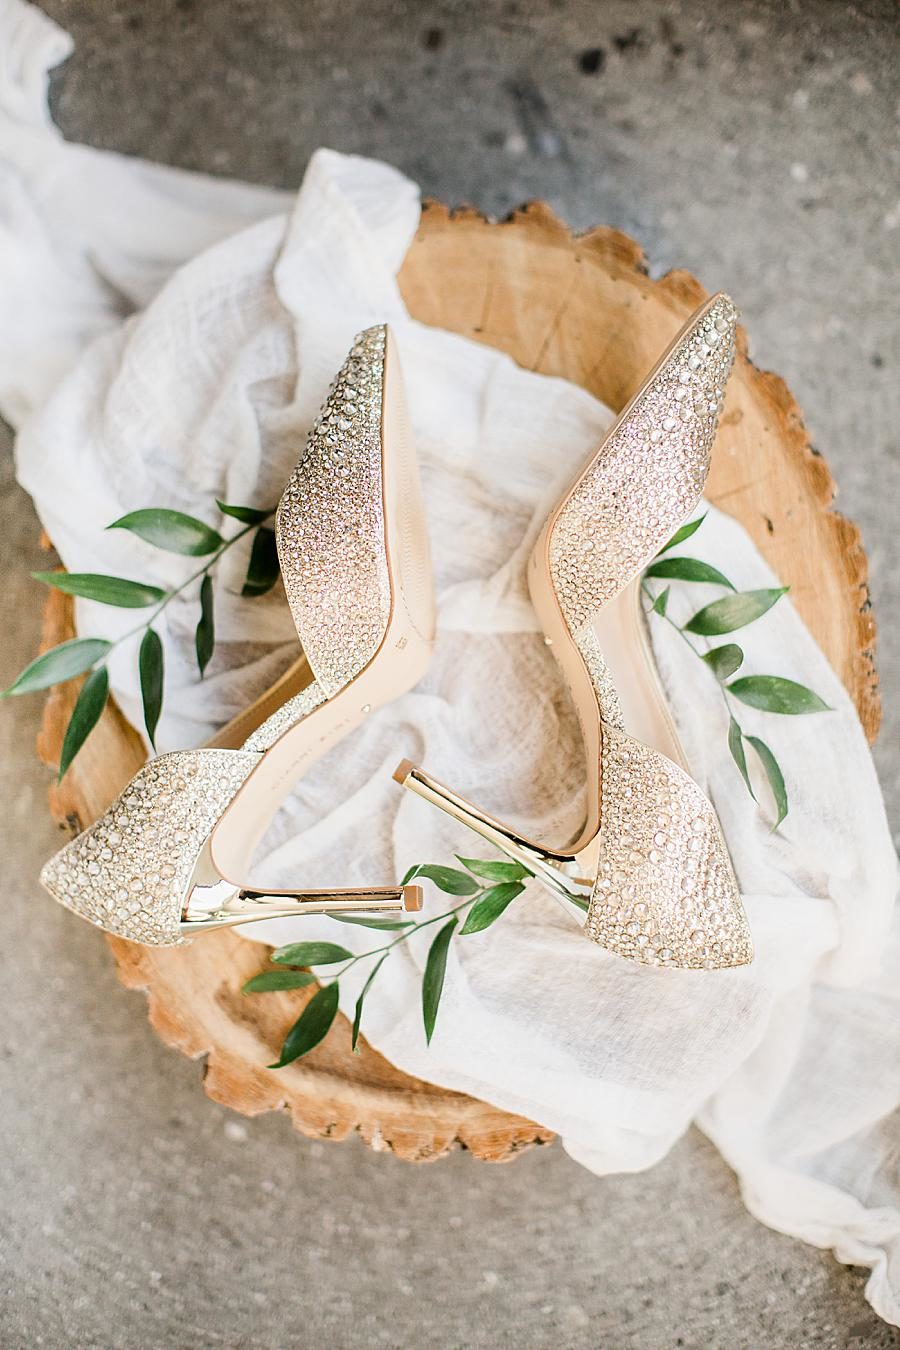 Crystal crusted wedding shoes at this The Press Room Wedding by Knoxville Wedding Photographer, Amanda May Photos.